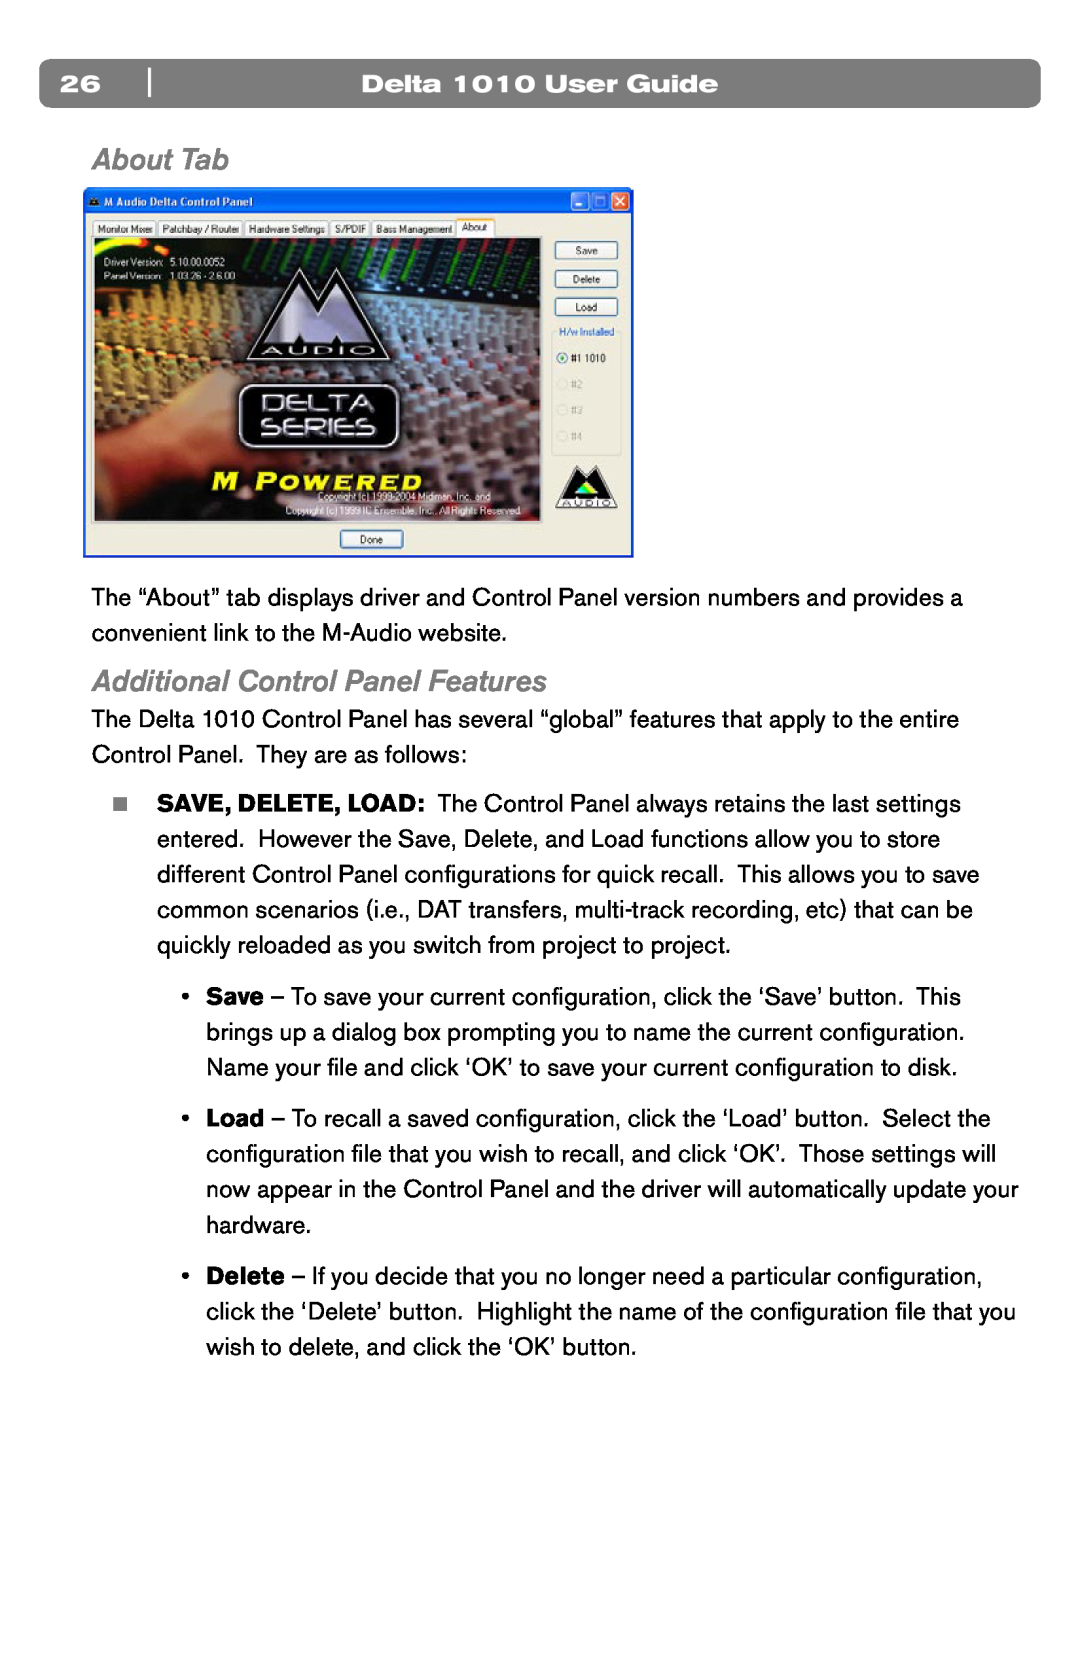 M-Audio DELTA 1010 manual About Tab, Additional Control Panel Features, Delta 1010 User Guide 